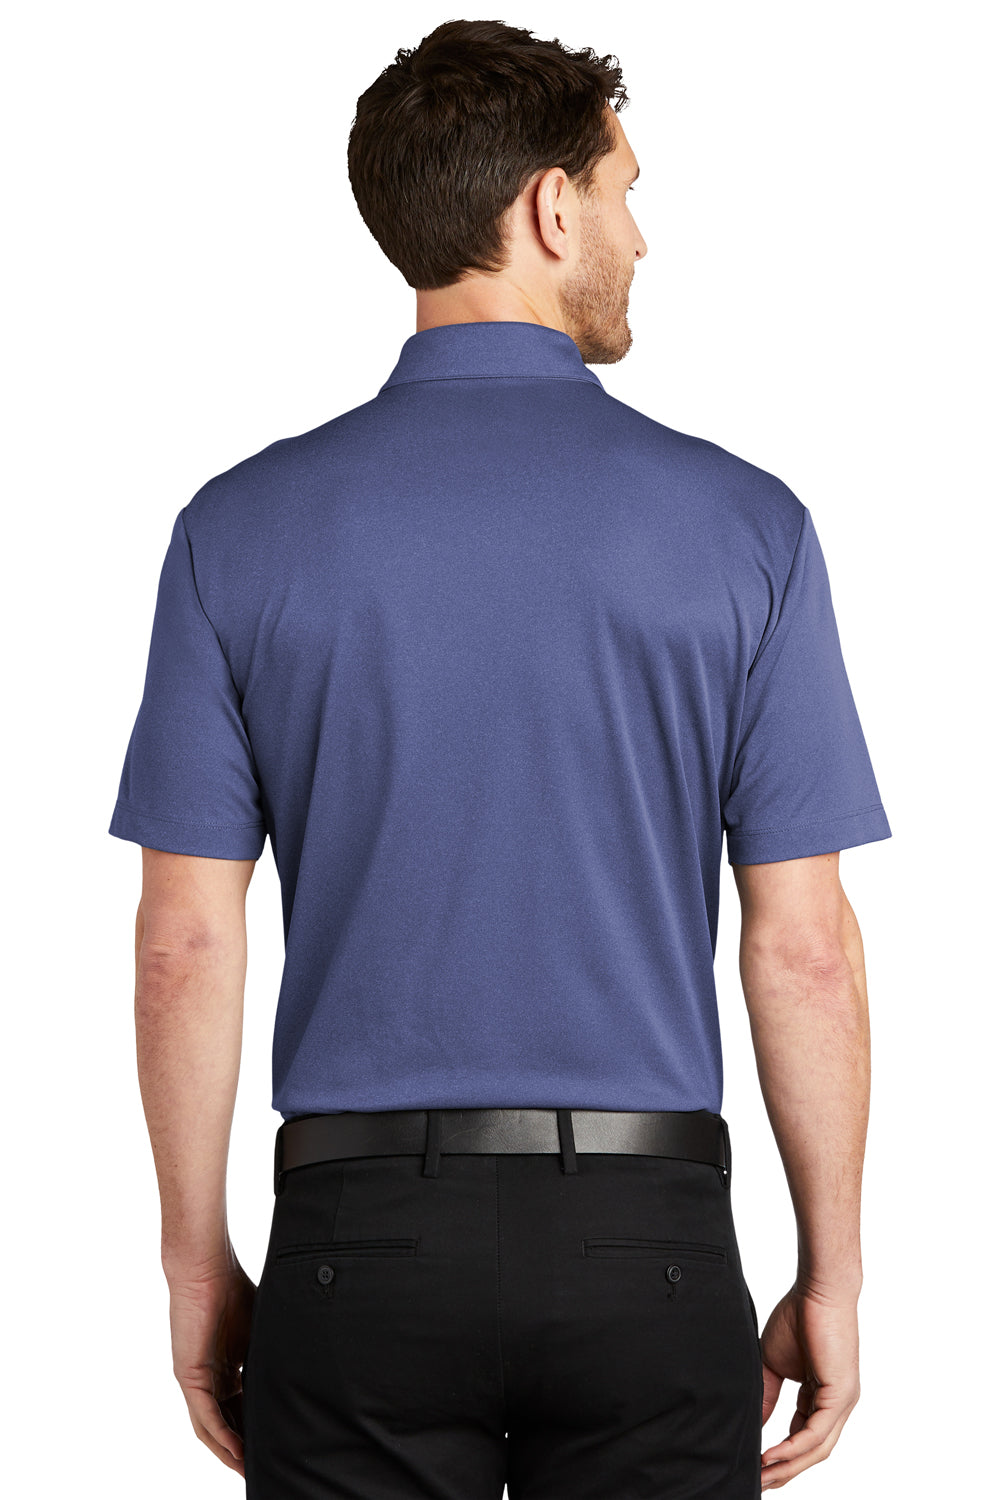 Port Authority Mens Performance Silk Touch Short Sleeve Polo Shirt Heather Royal Blue Side